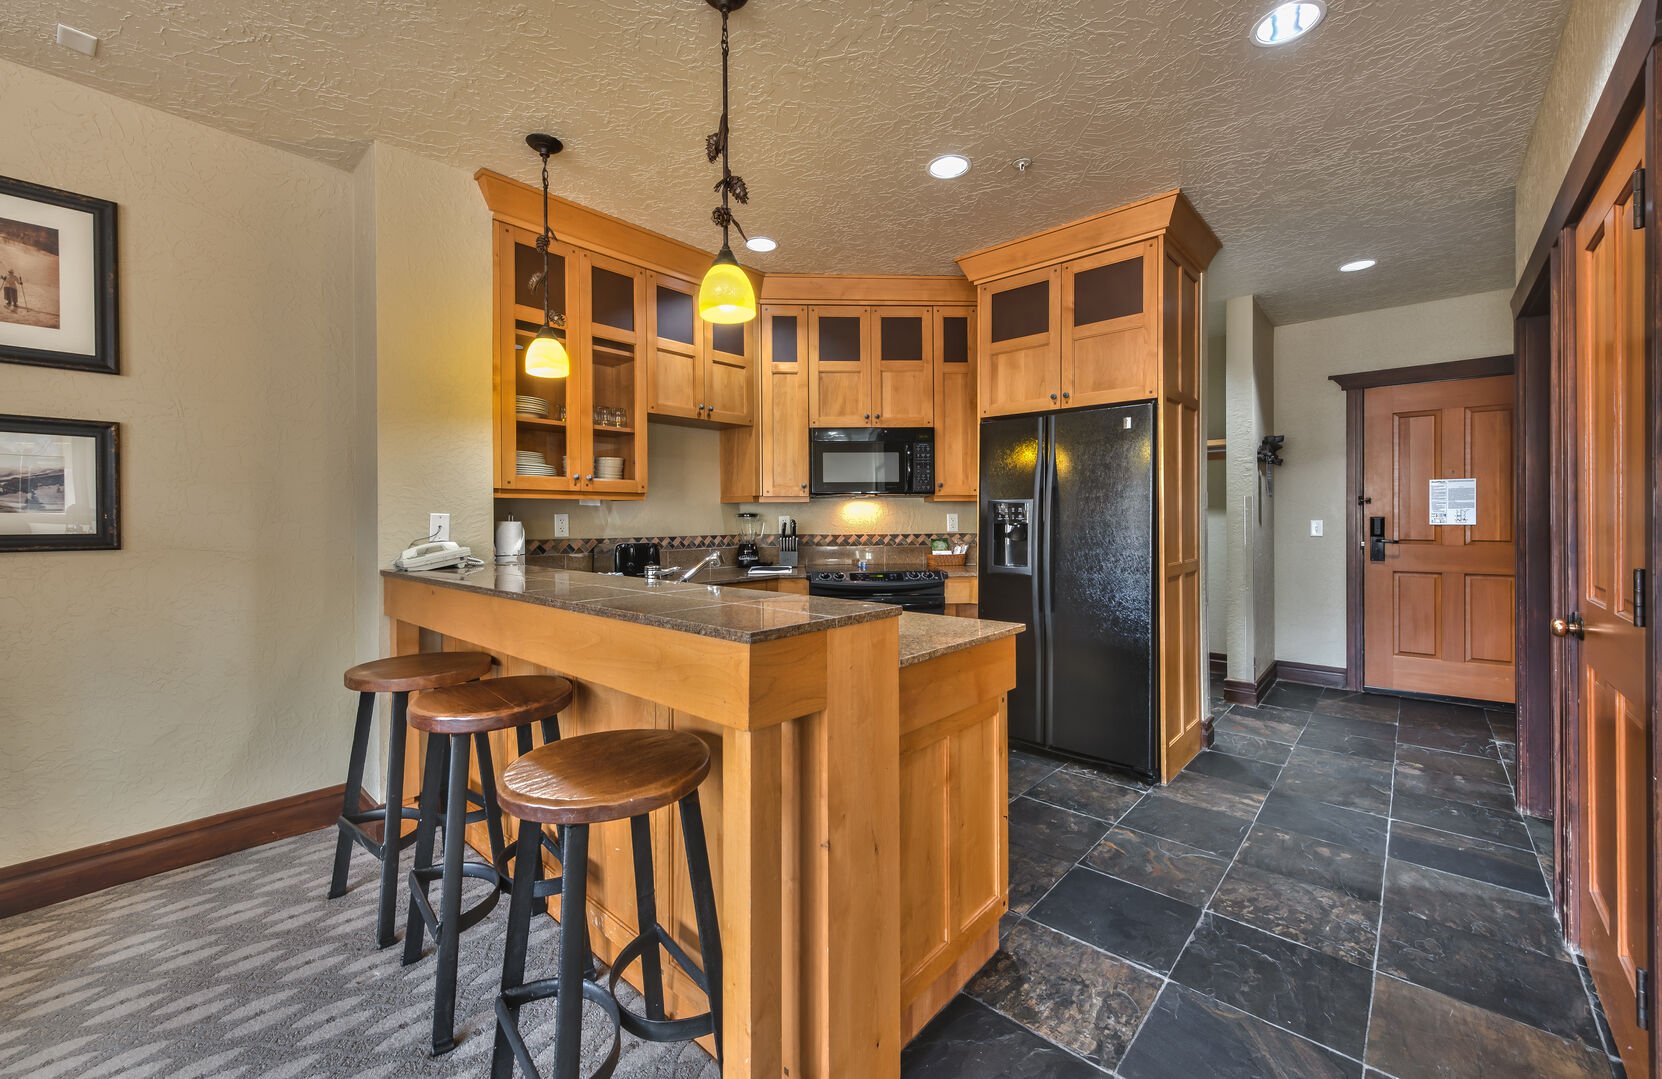 Kitchen is well equipped and includes a breakfast bar